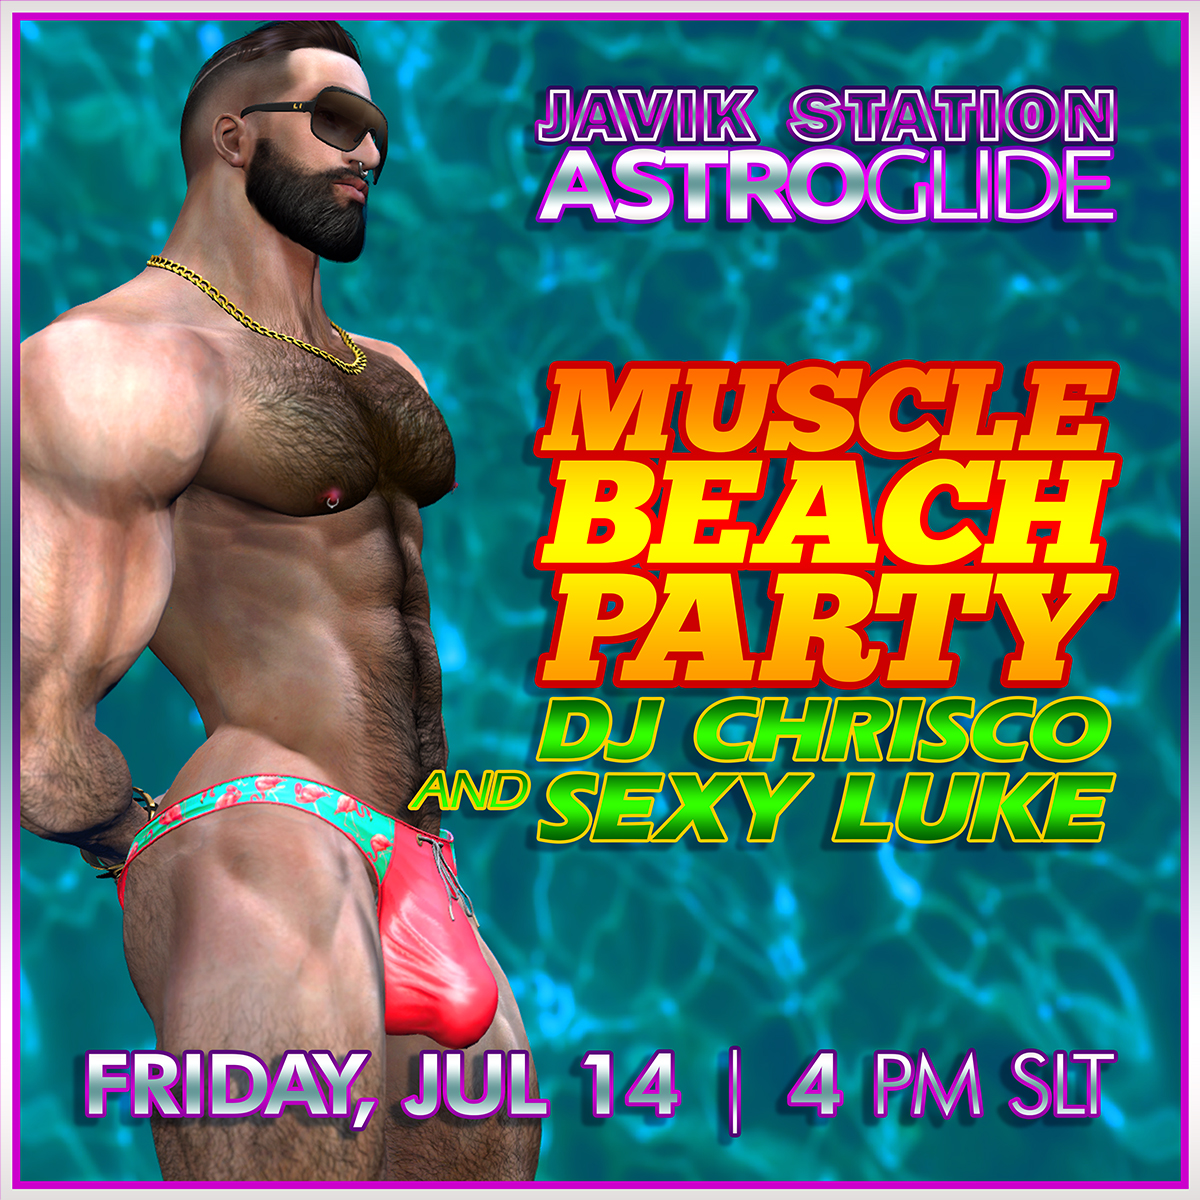 ASTROGLIDE MUSCLE BEACH PARTY with DJ CHRISCO!